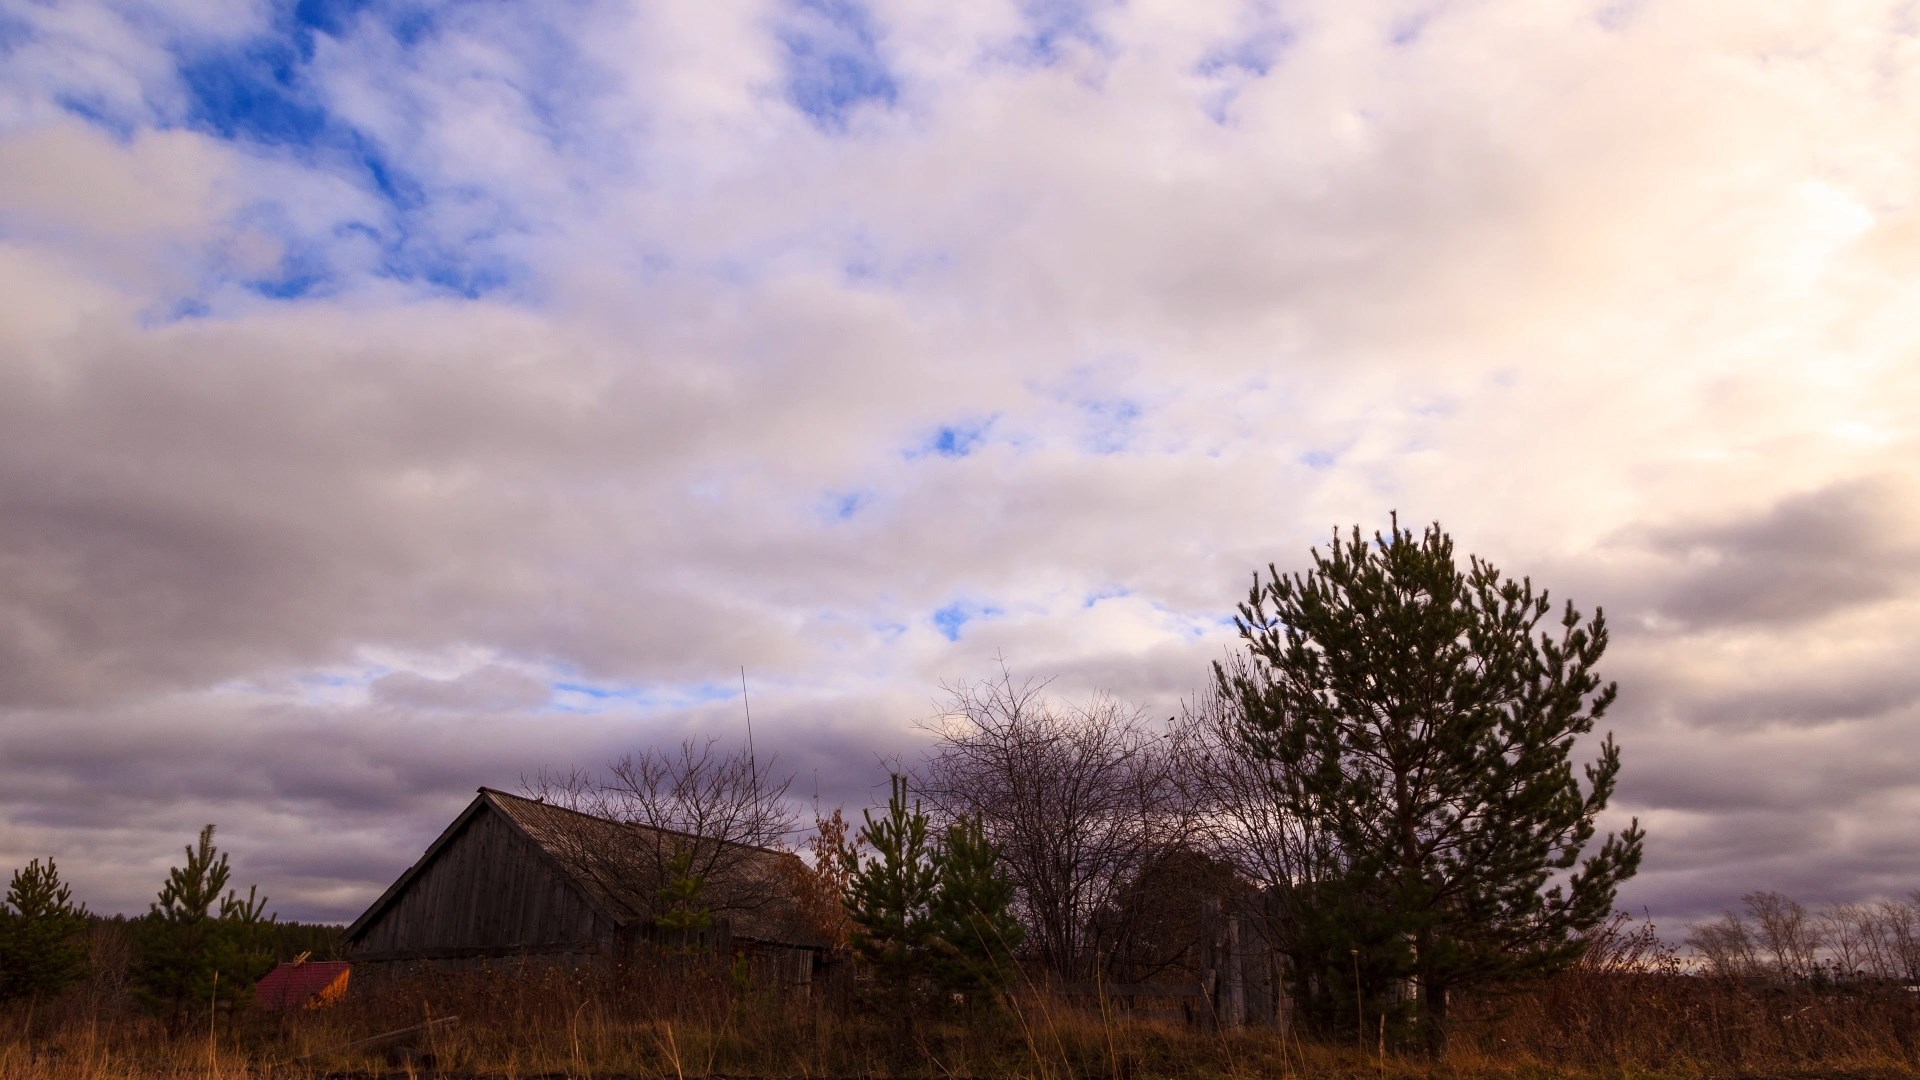 Clouds sweep over the barn. Time Lapse